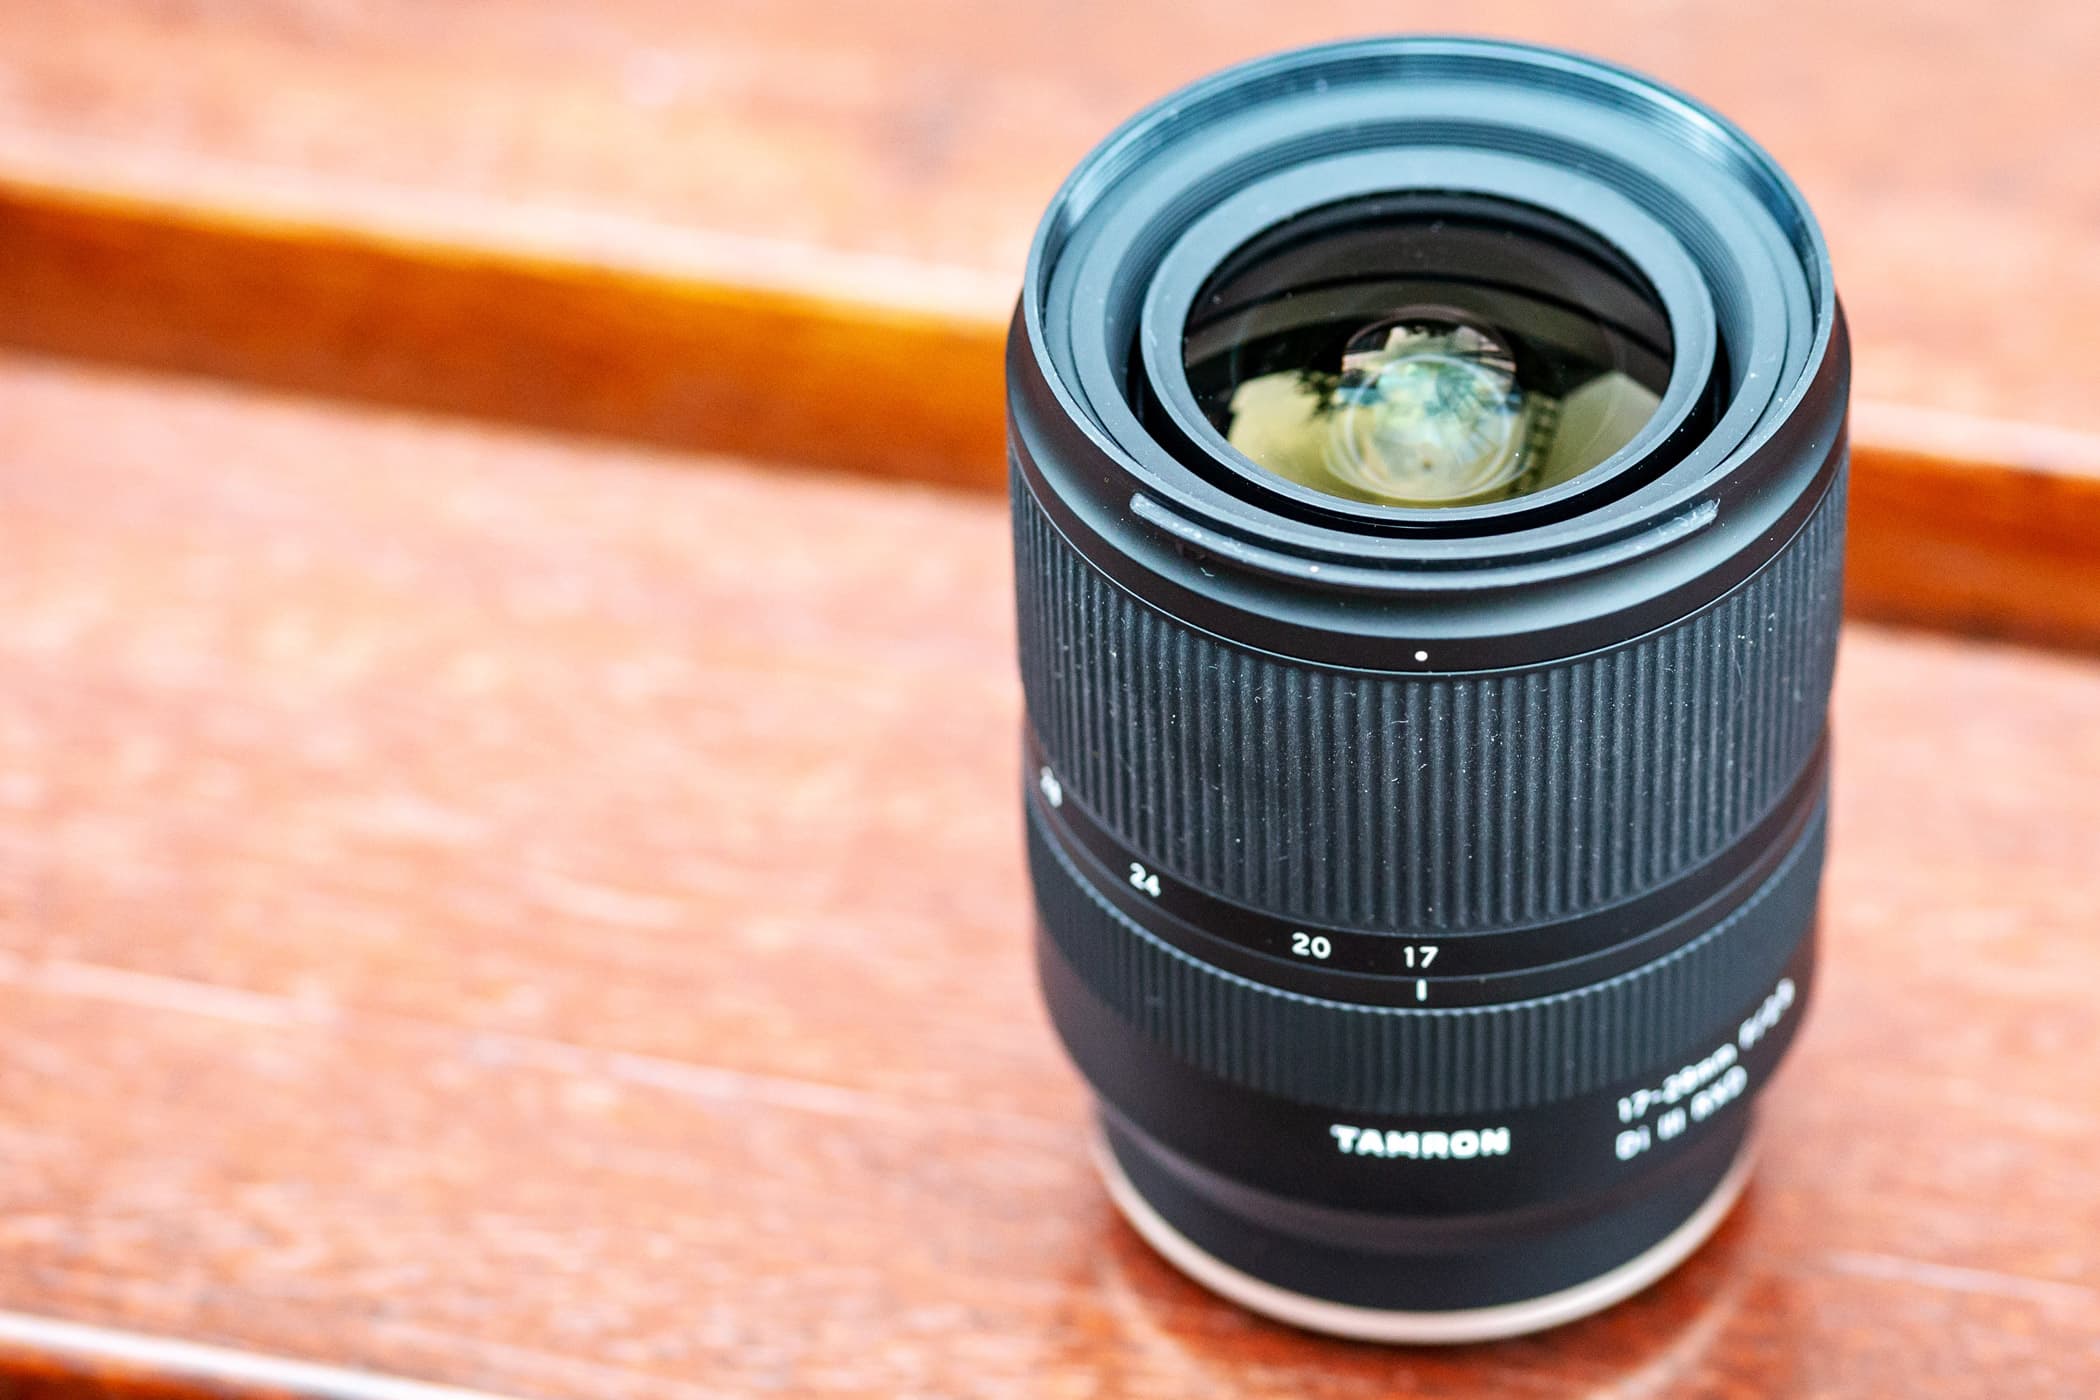 The lens sports a 67mm filter thread - unusually small for a wideangle zoom. prime vs zoom lens